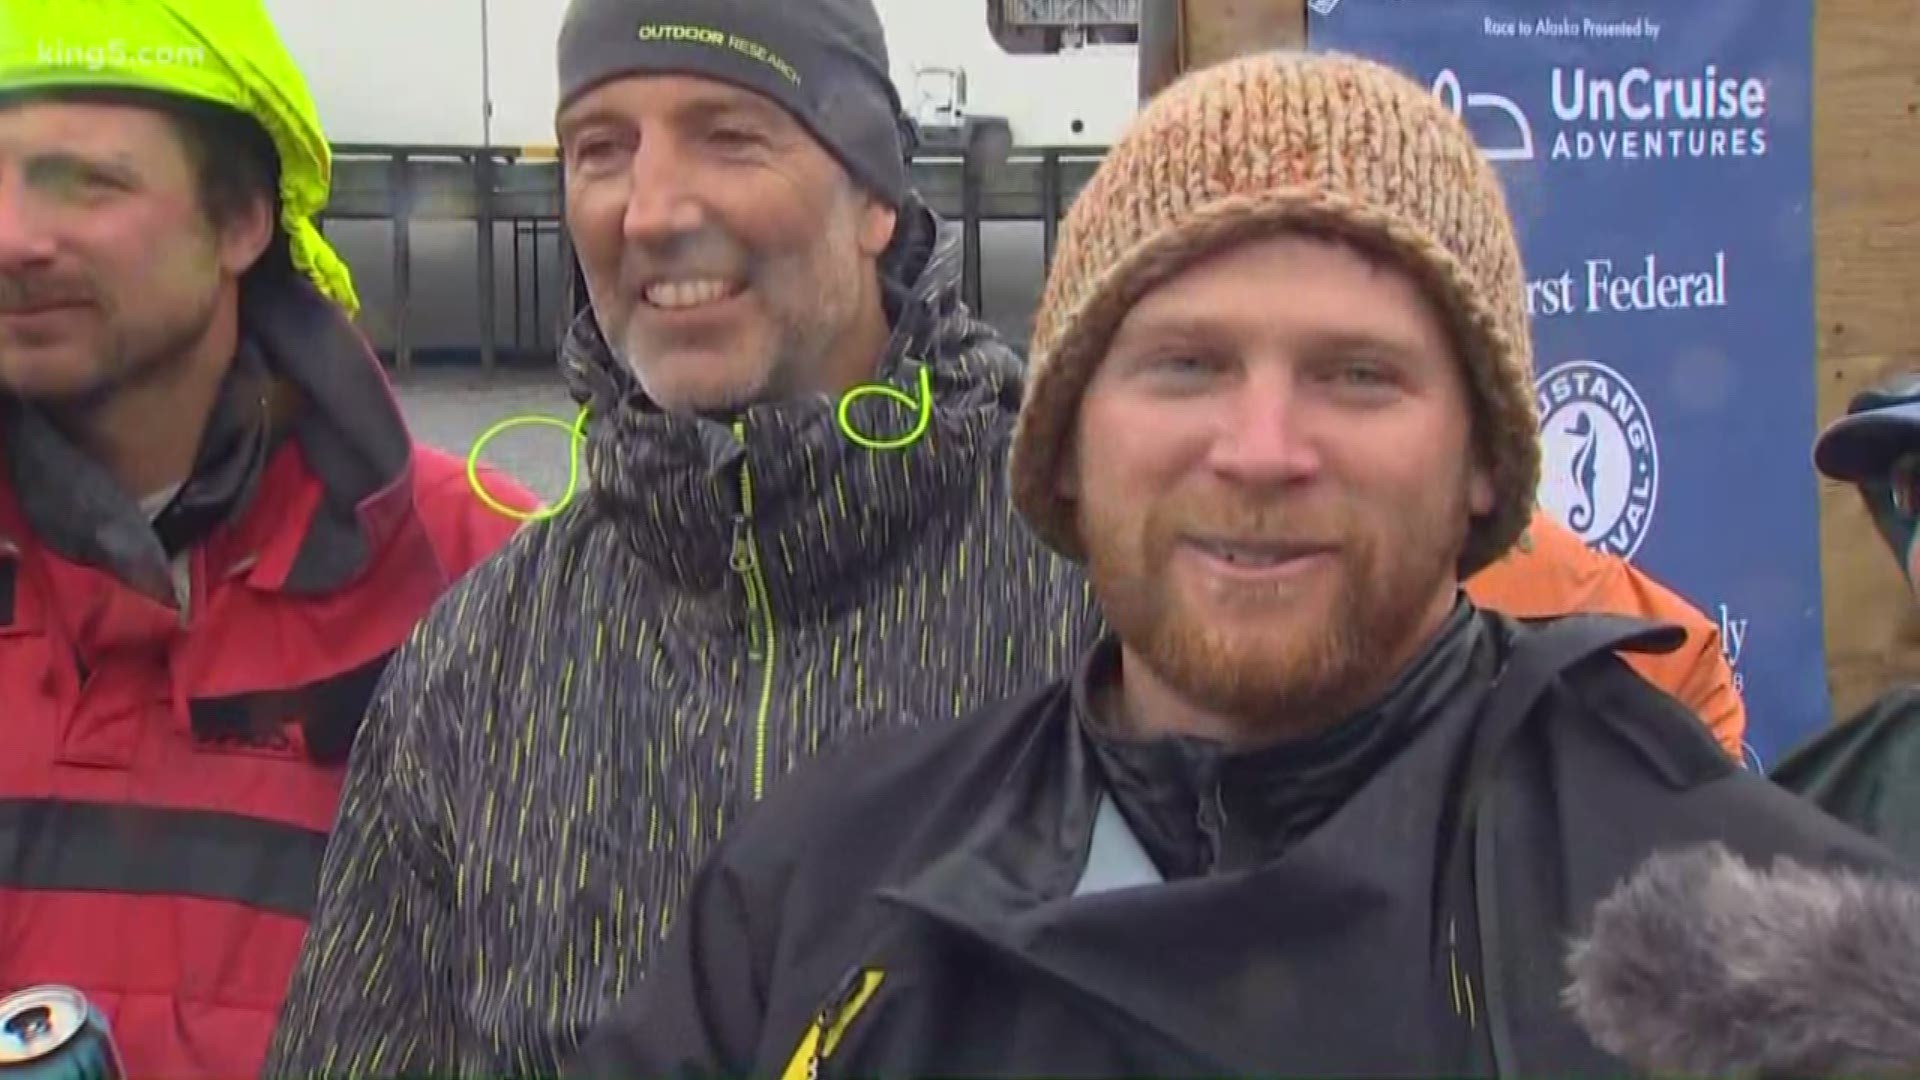 A Seattle team, Angry Beaver, sailed into Ketchikan to win the "Race to Alaska."